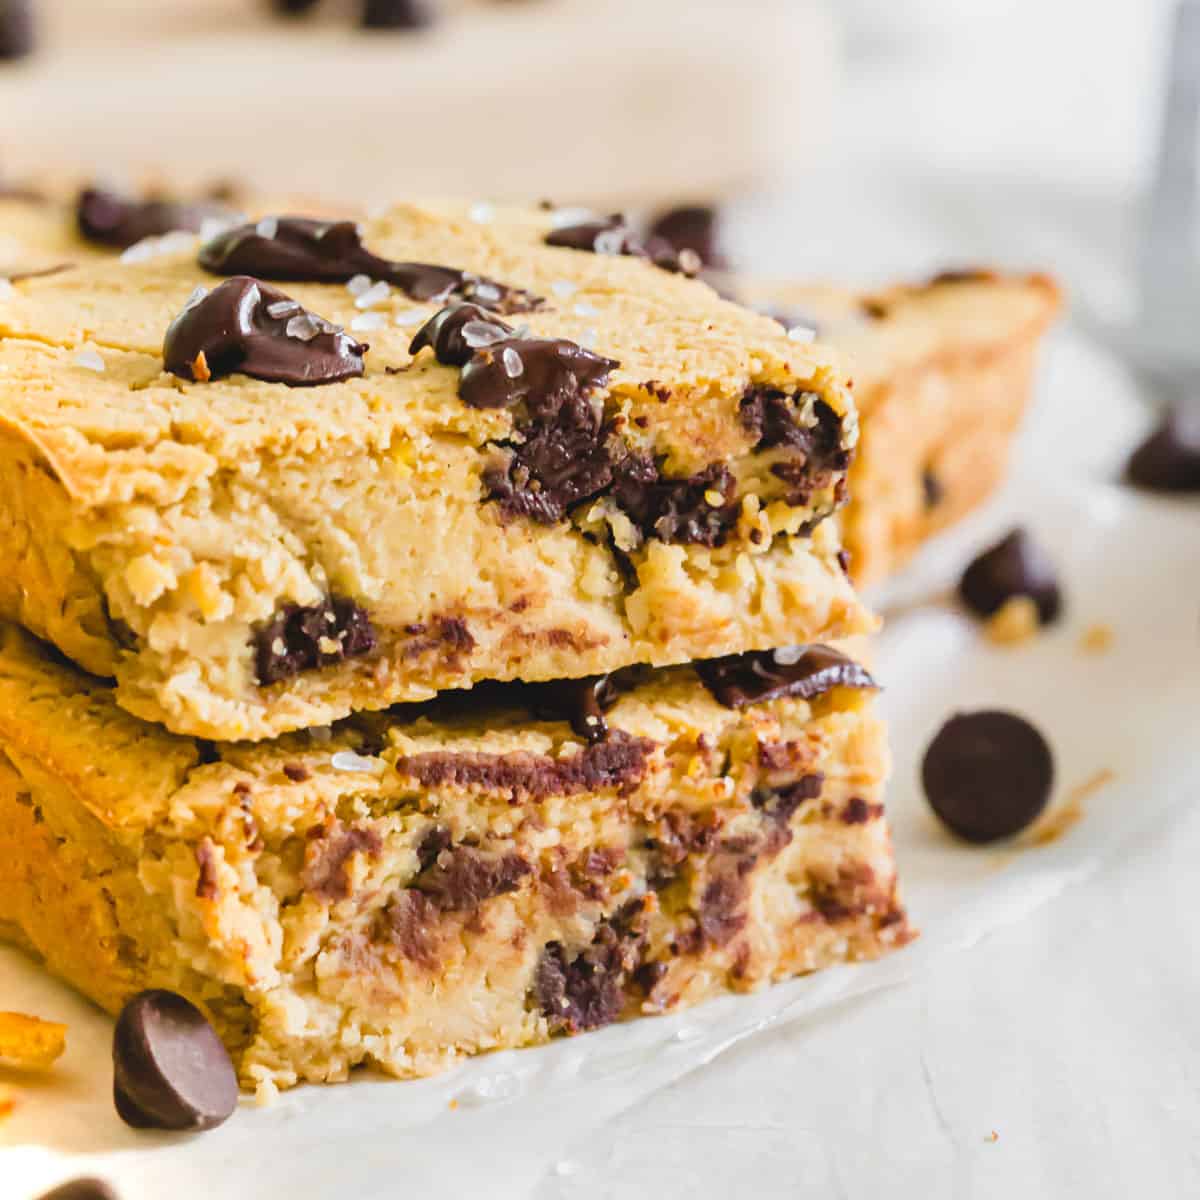 Chickpea blondies recipe with chocolate chips and garnished with flaky sea salt.